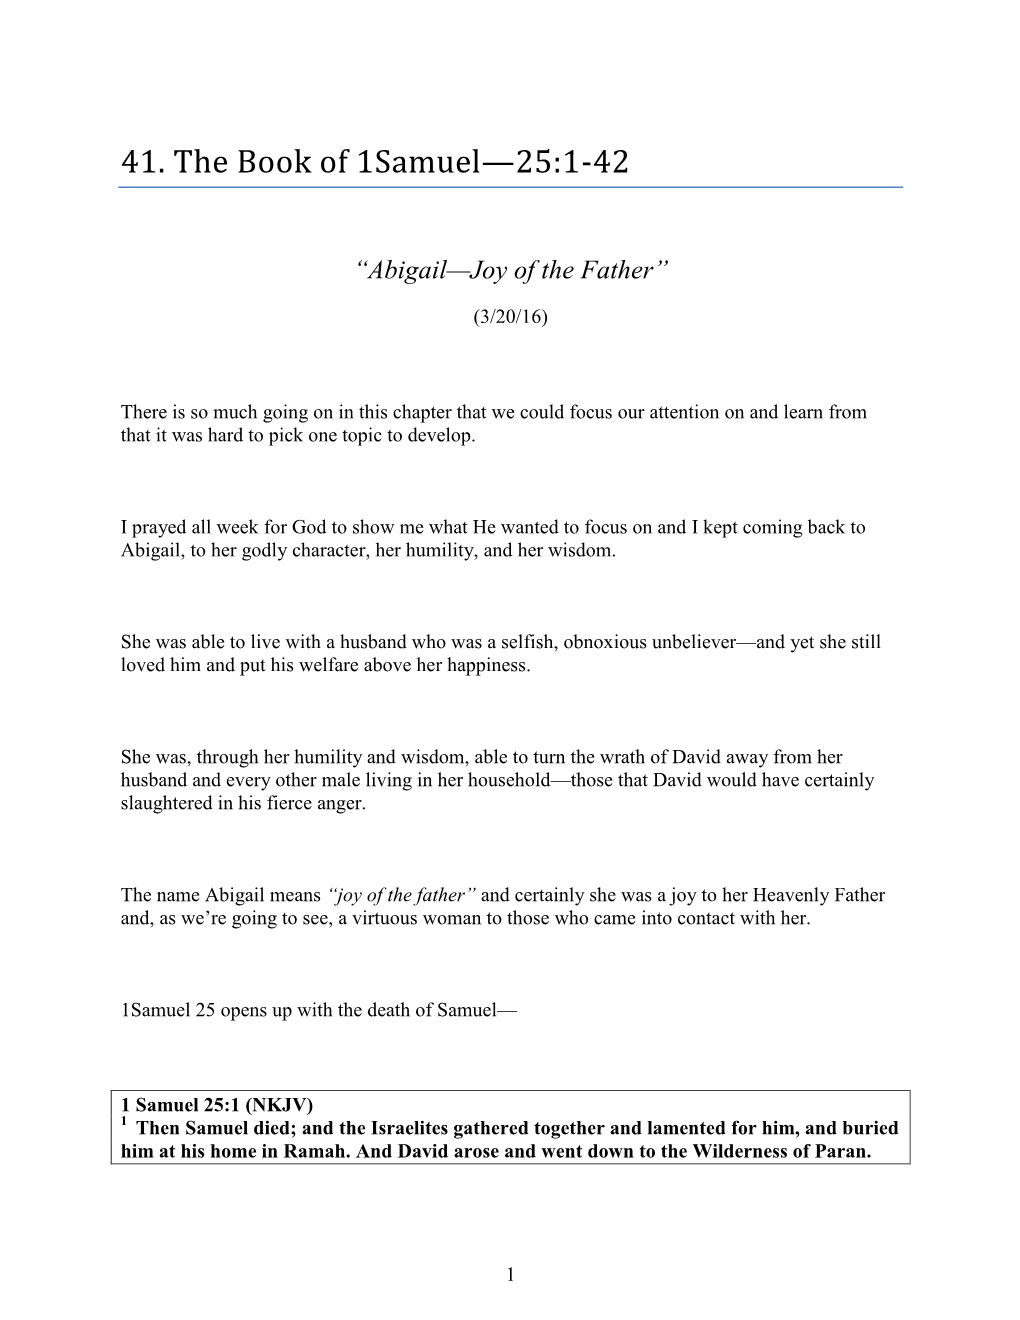 41. the Book of 1Samuel—25:1-42